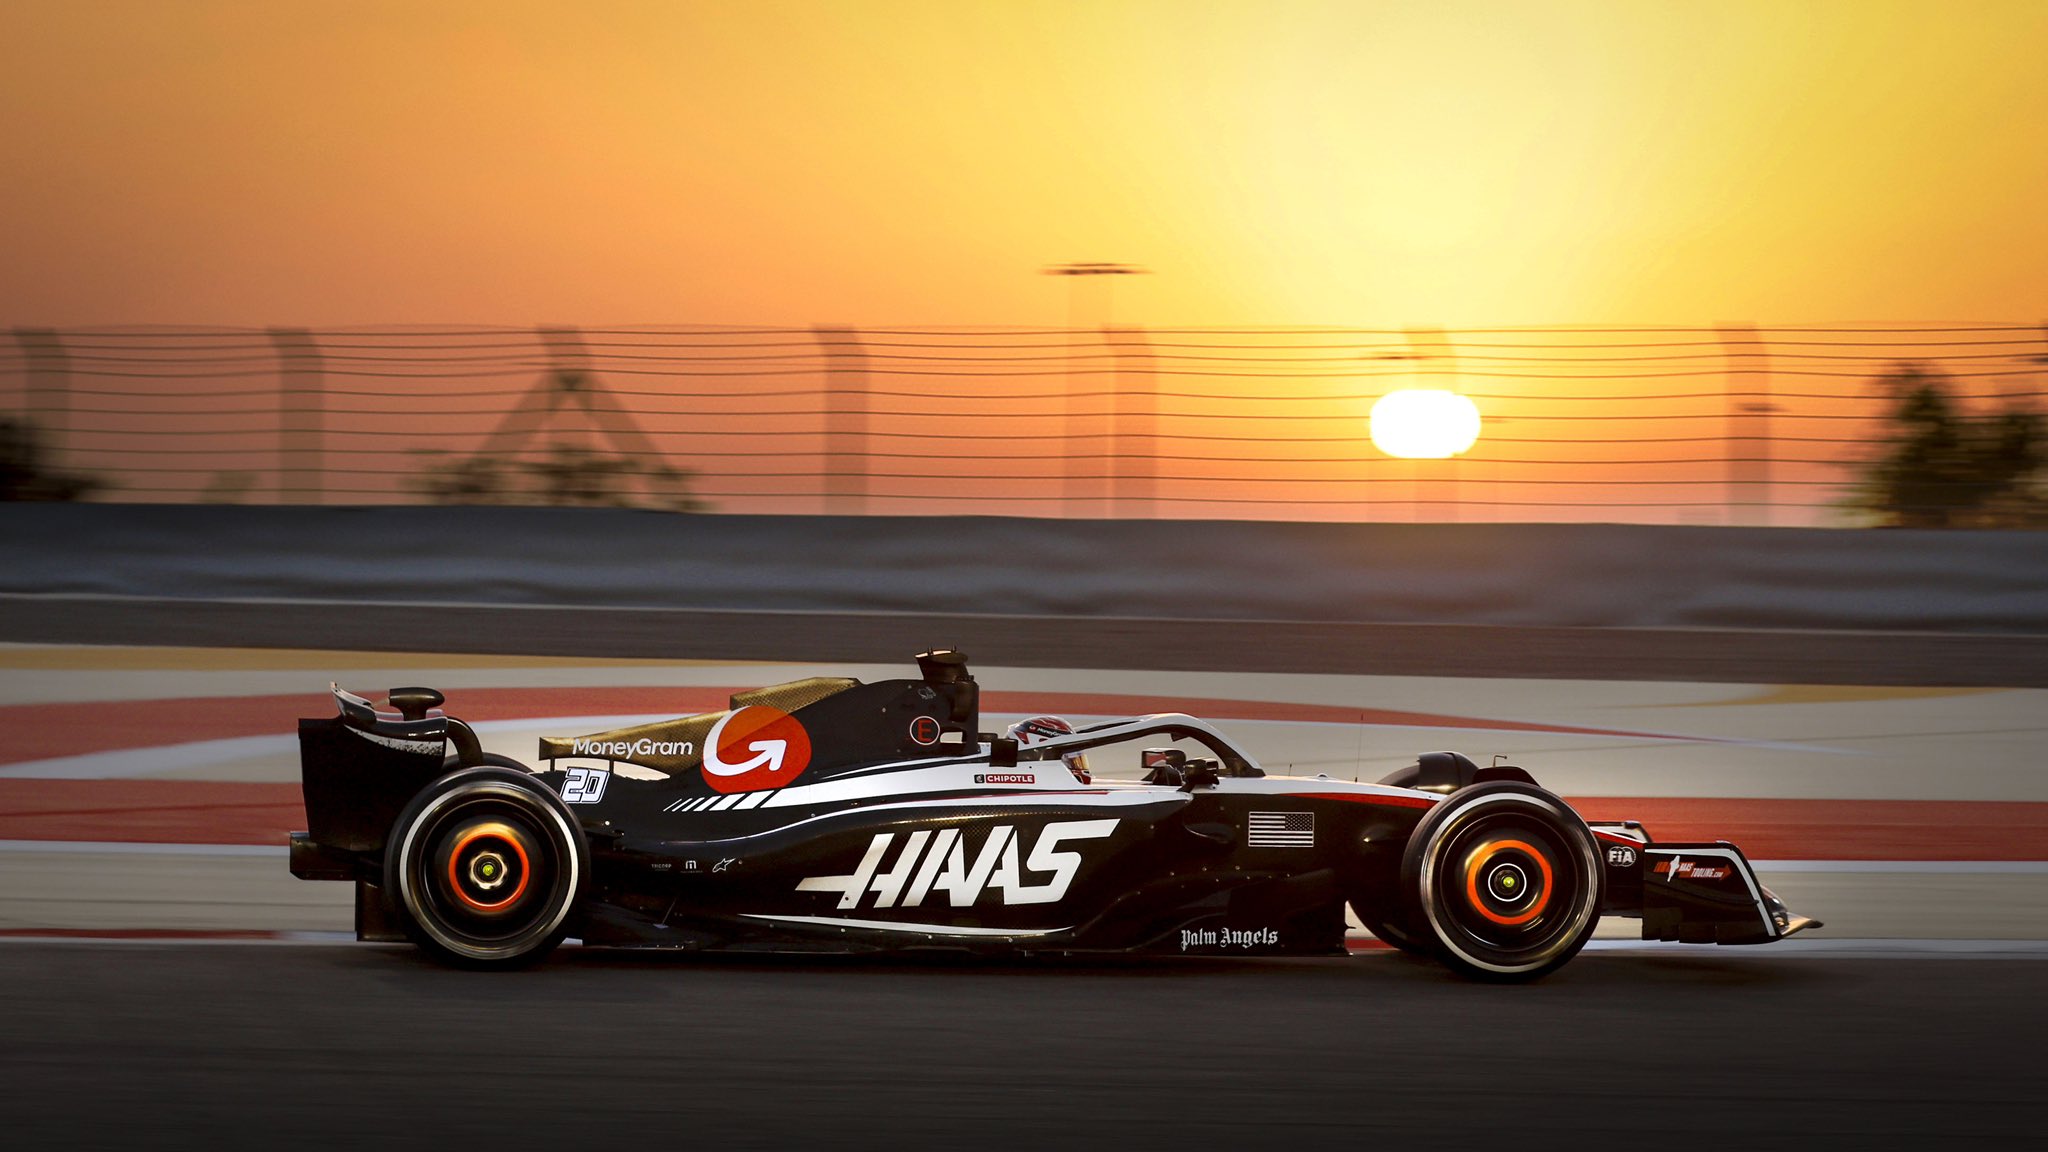 Kevin Magnussen driving the 2023 Haas challenger (Image Credit: HaasF1 on Twitter)